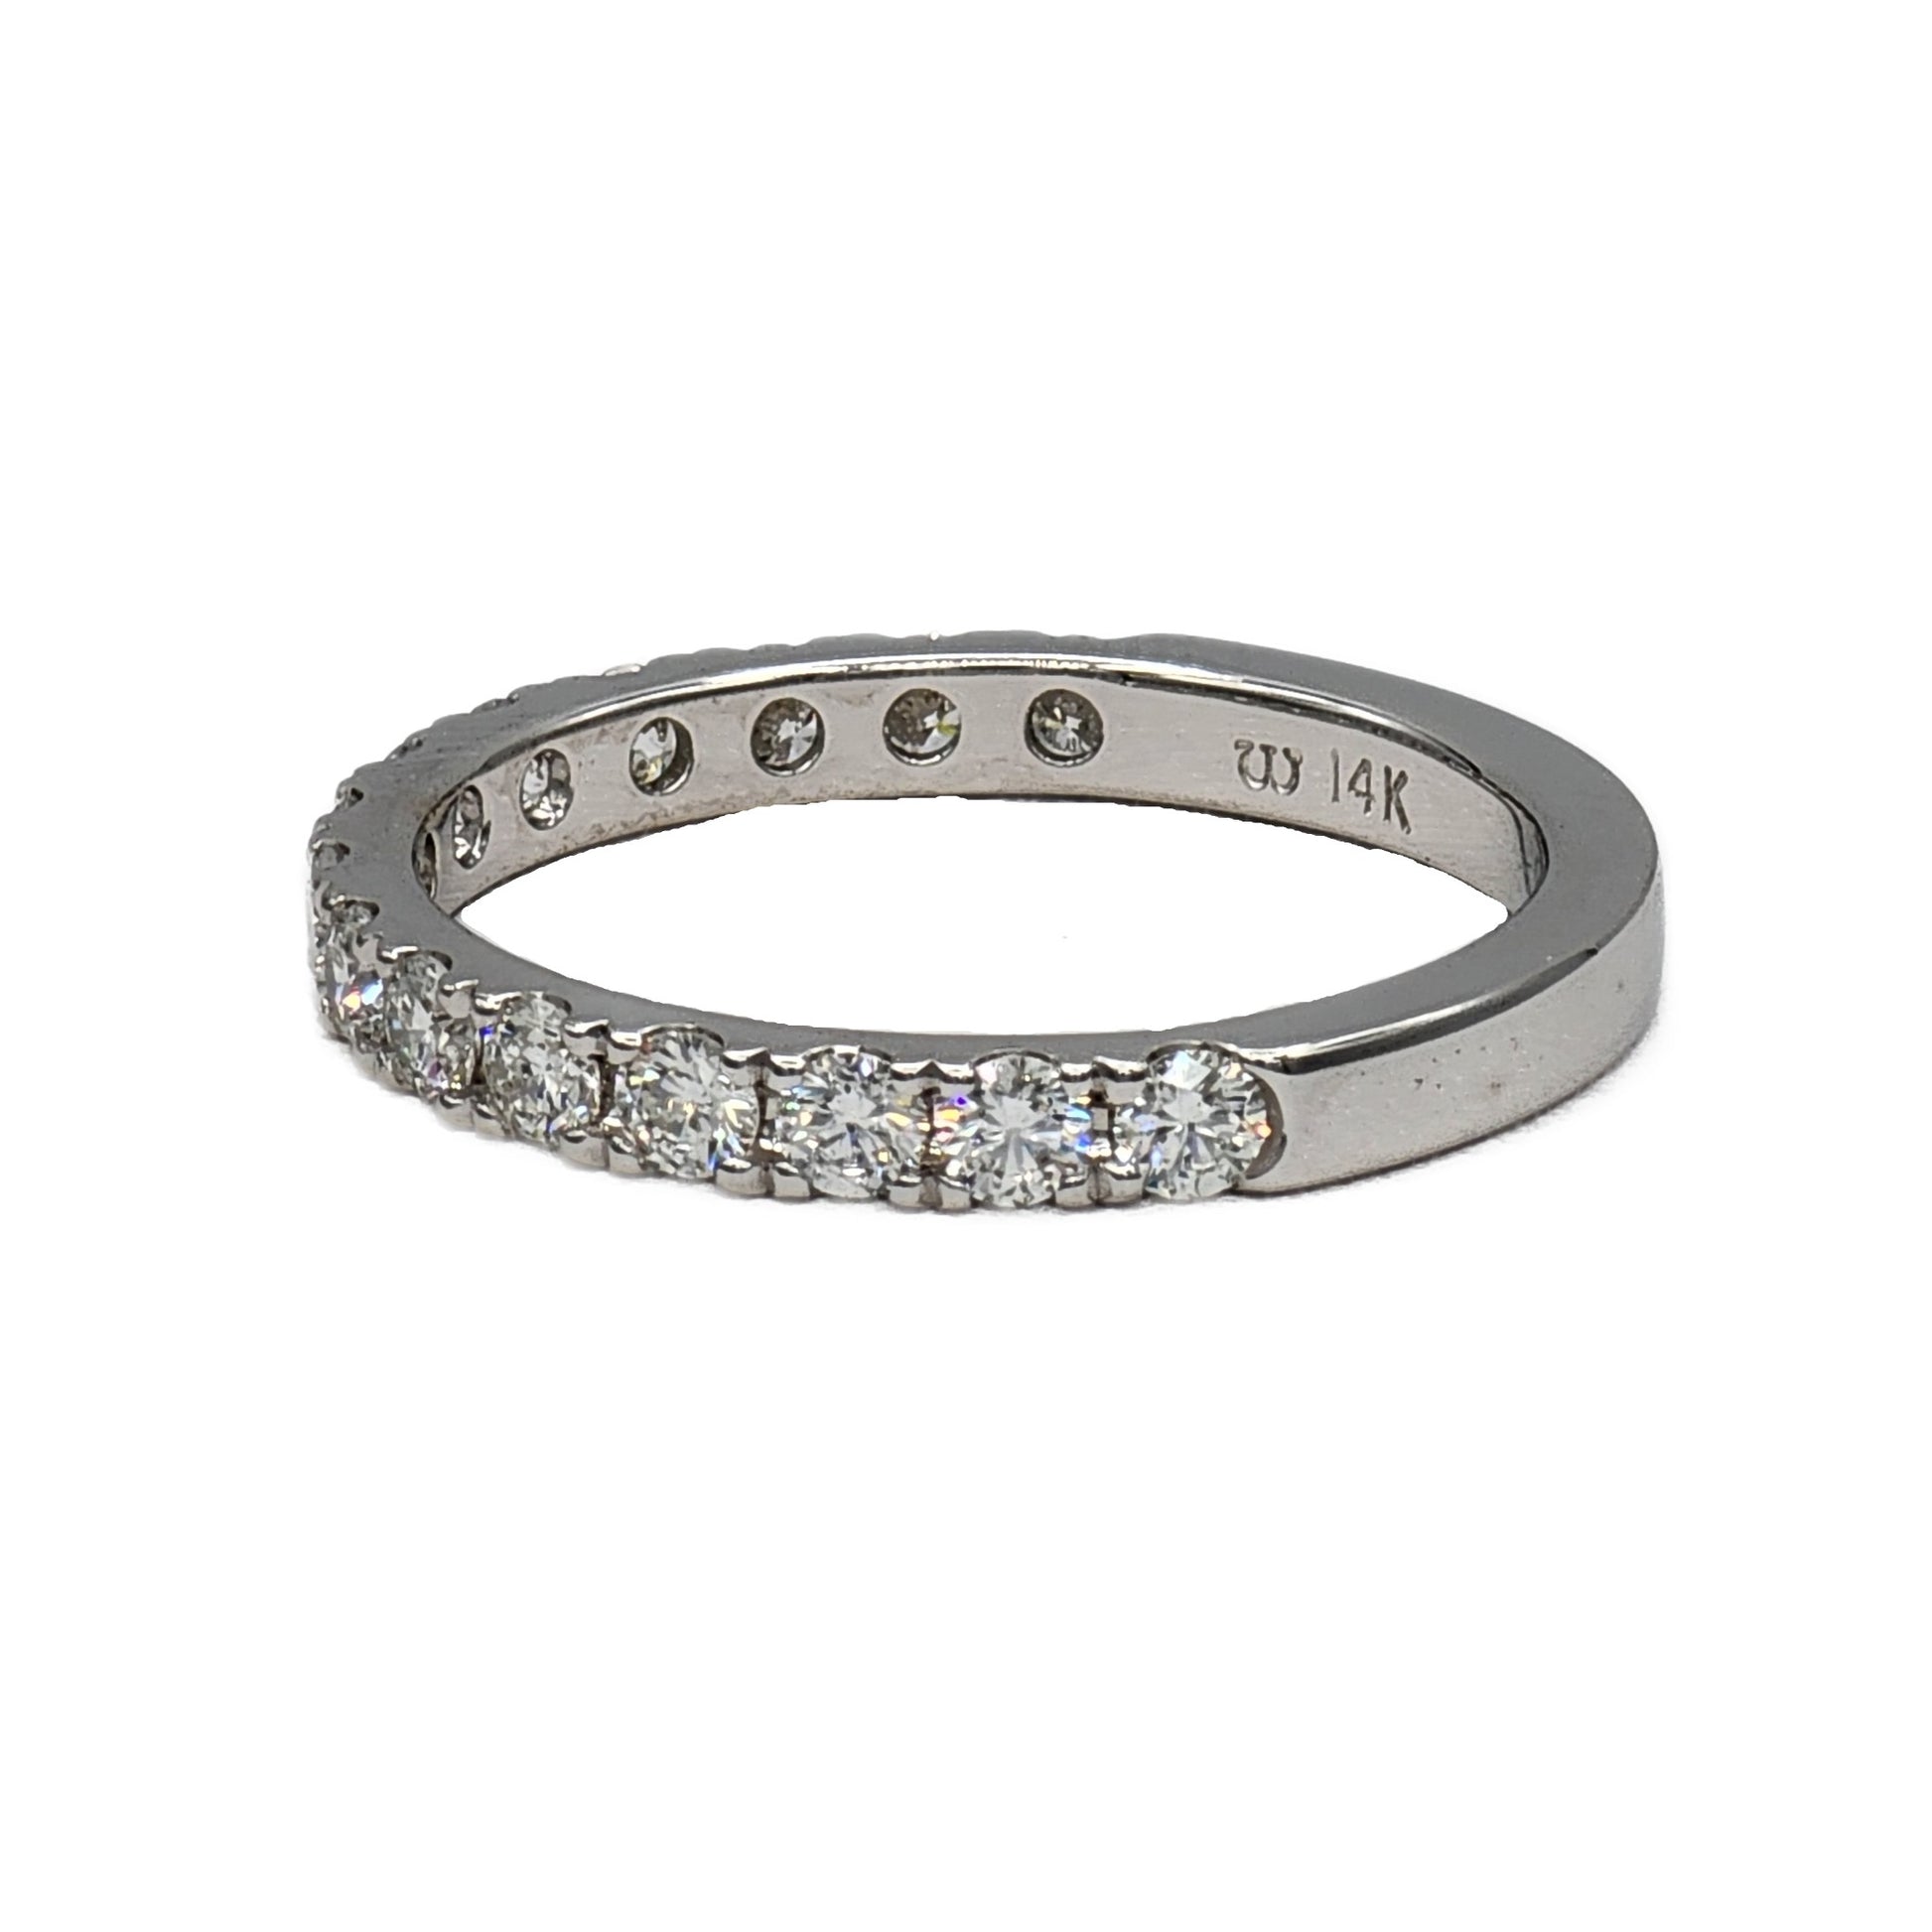 15=0.75 Carat Total Weight Round Brilliant Cut Diamond Band in 14K White Gold